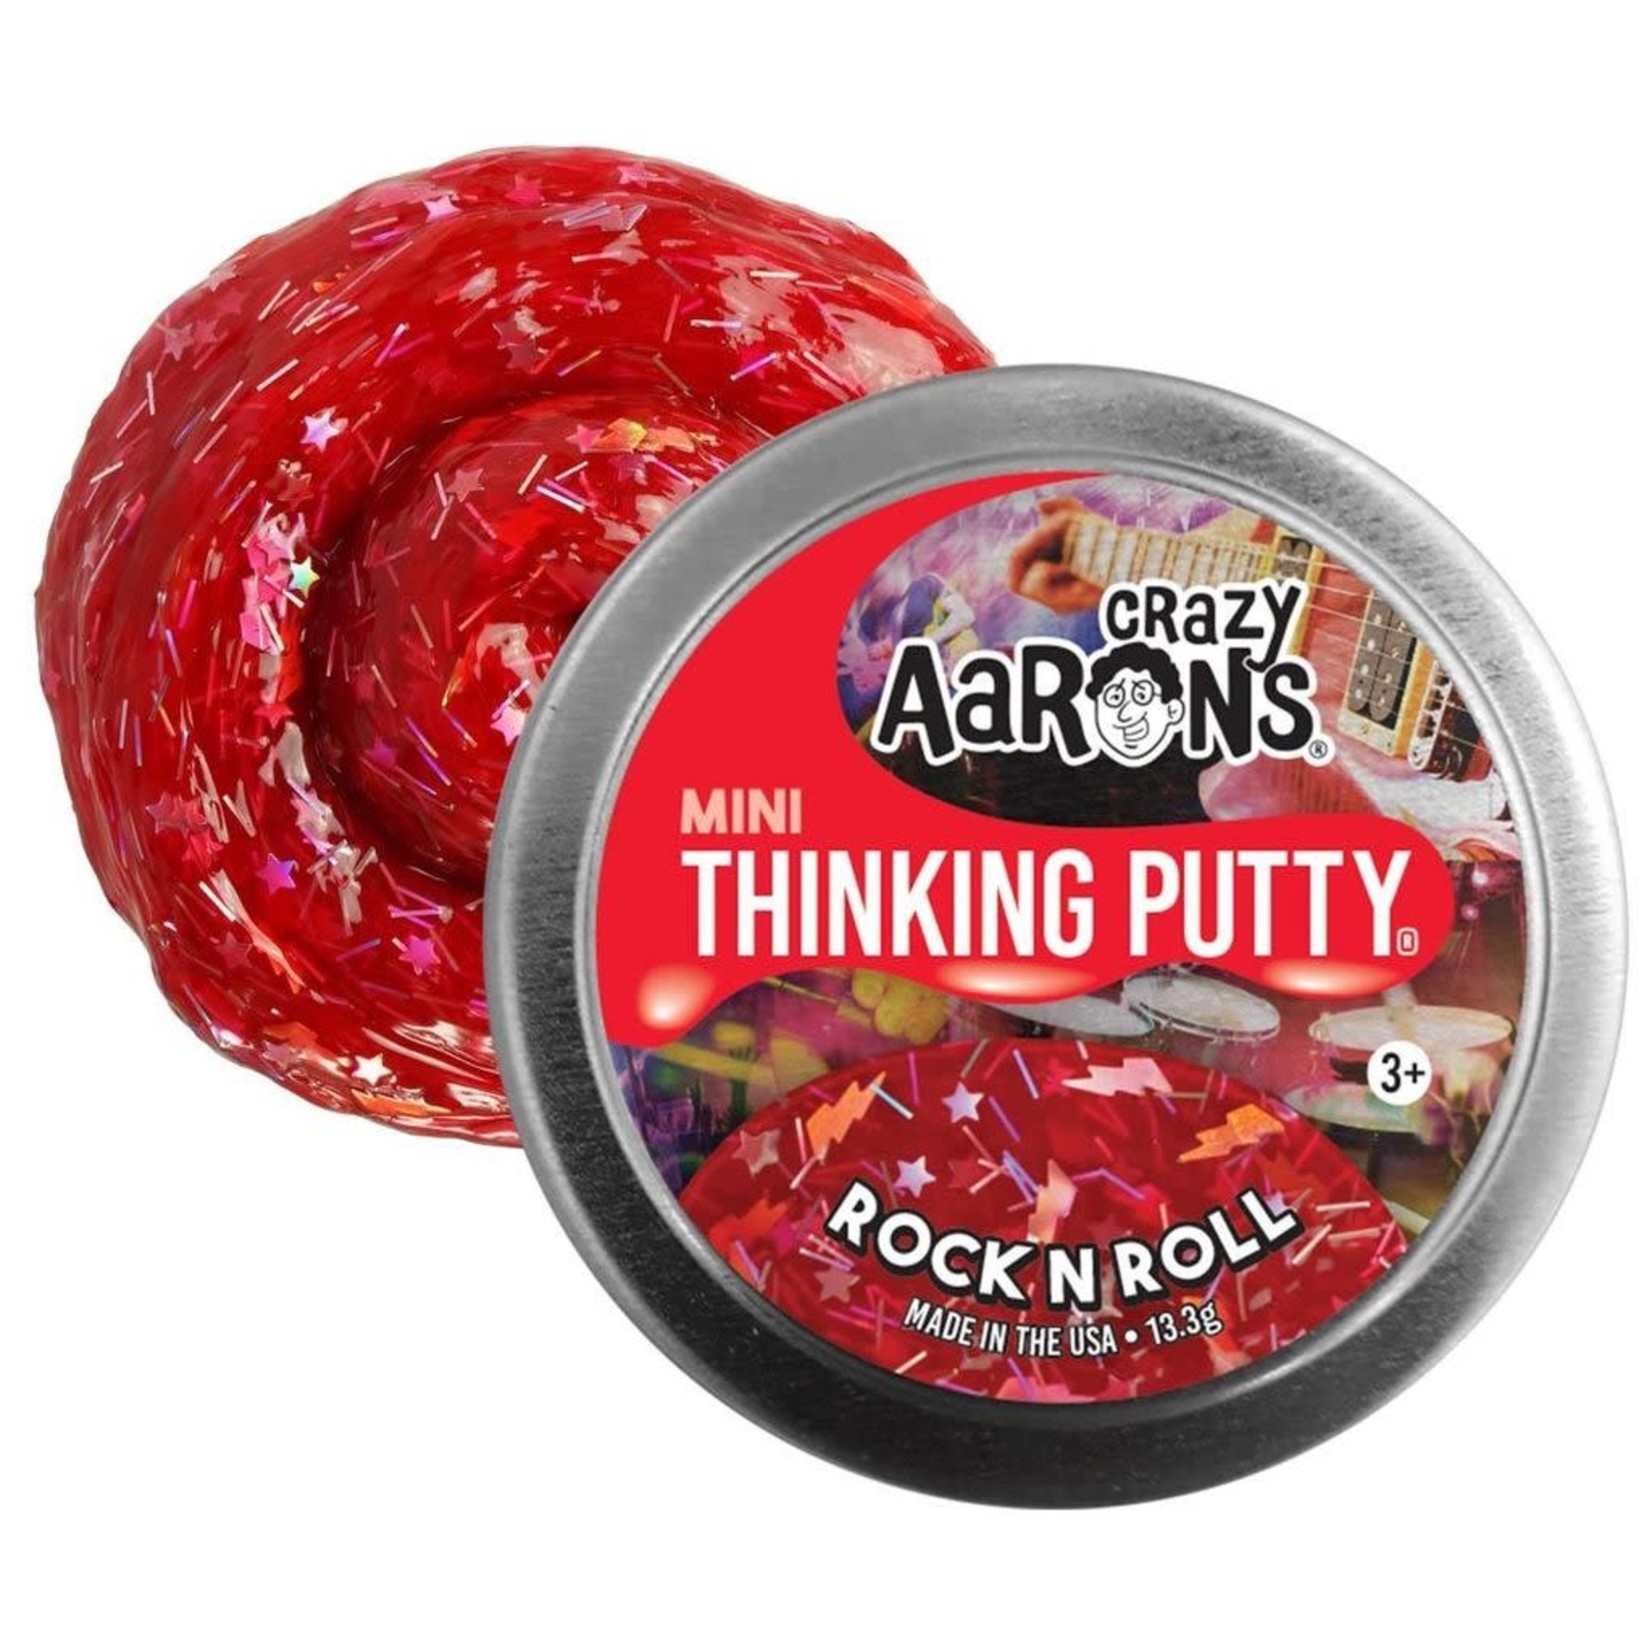 Crazy Aaron's Thinking Putty Mini Rock n' Roll Thinking Putty